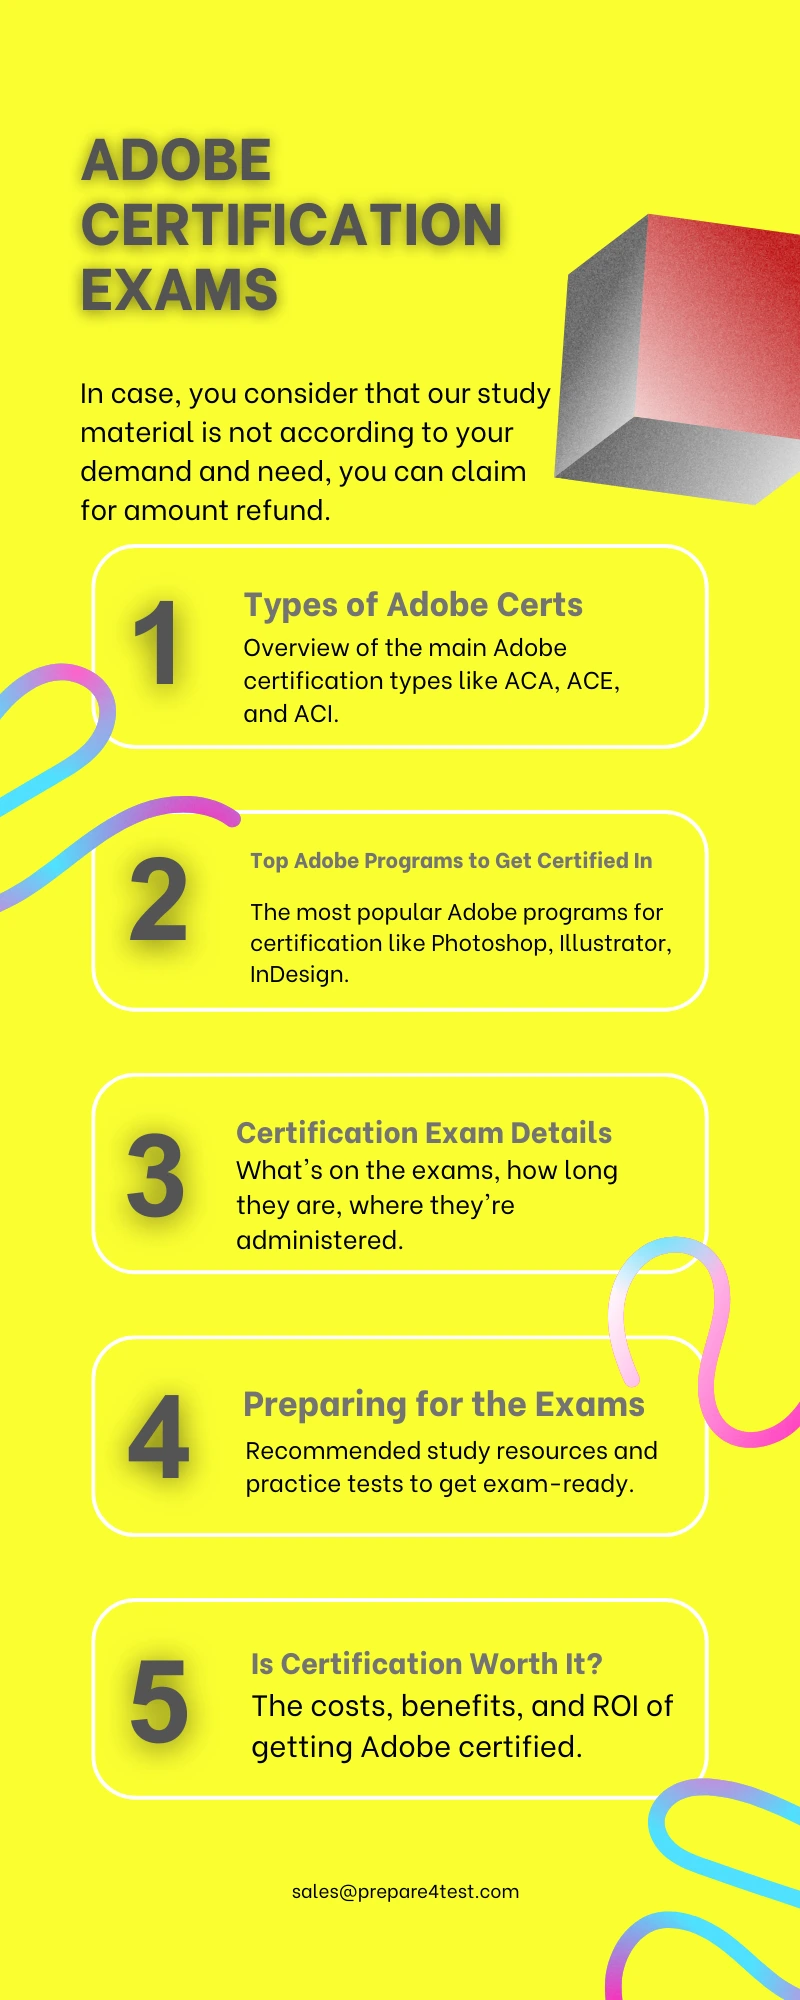 Adobe Certification Exams Infographic